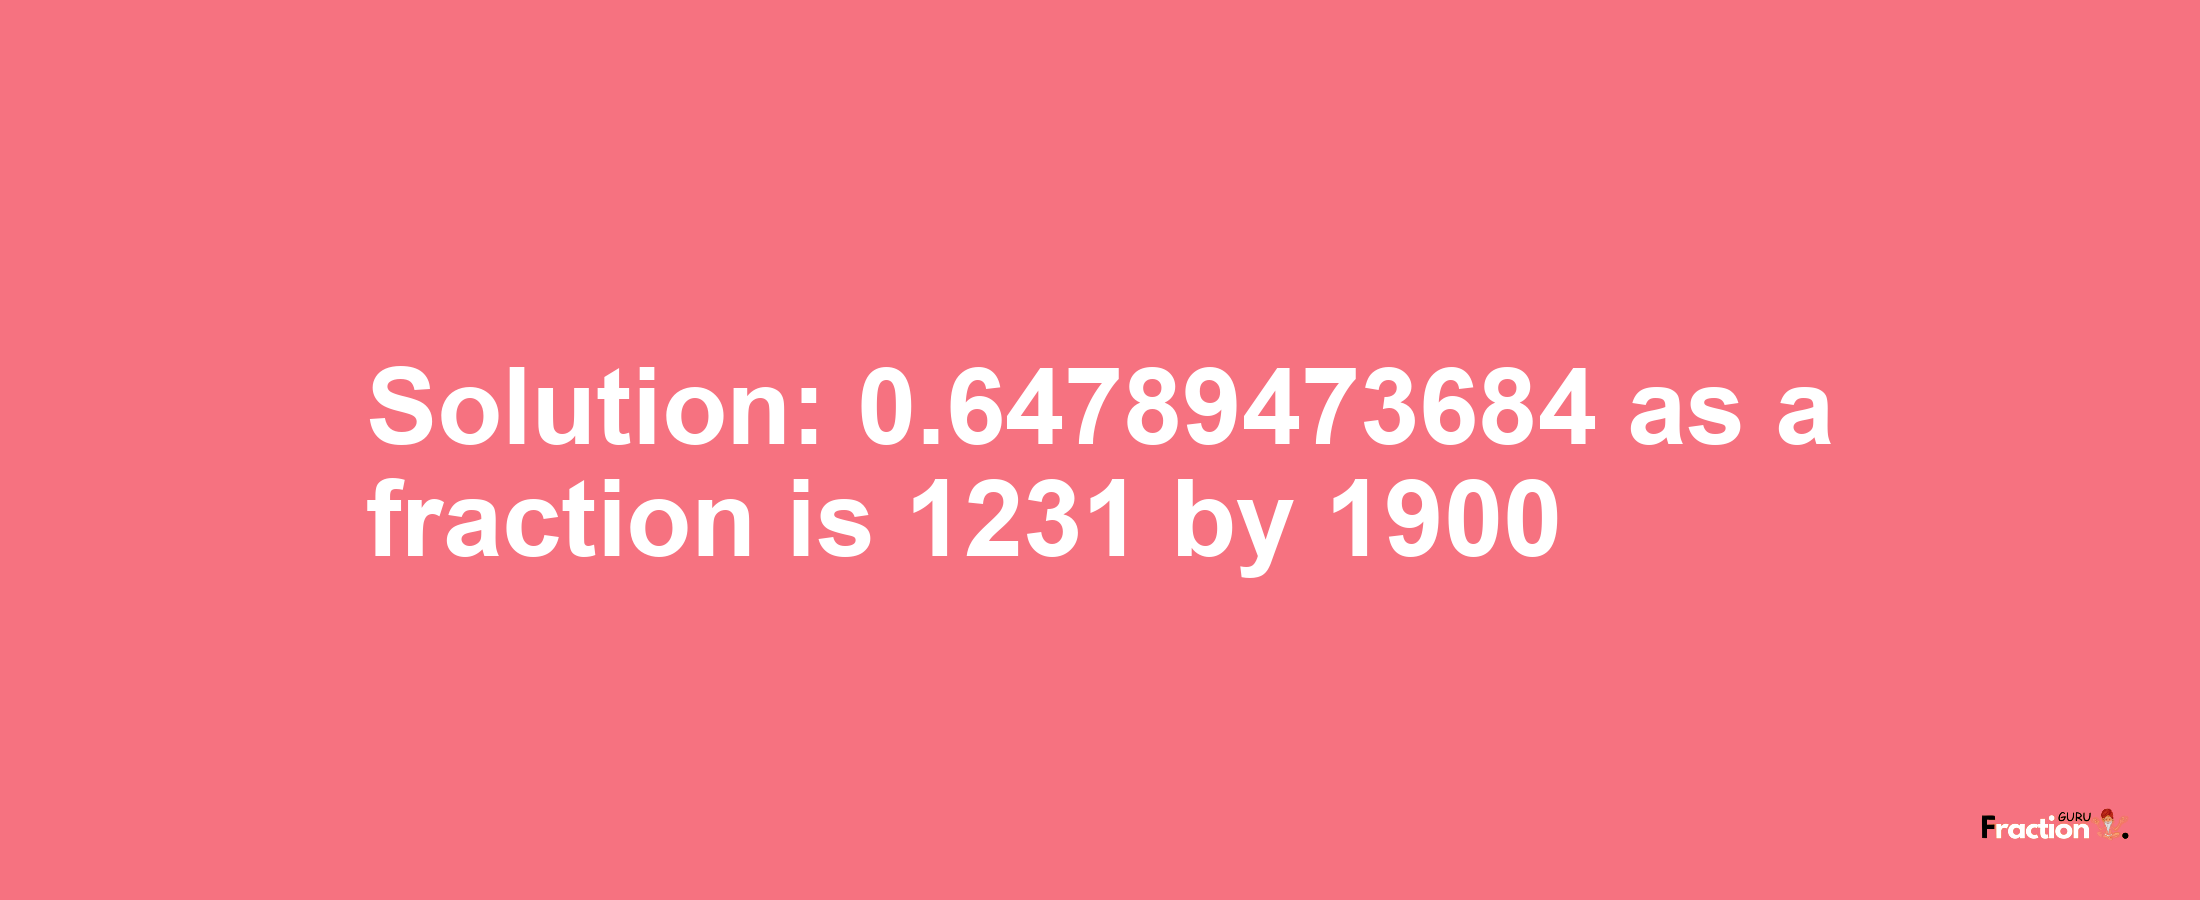 Solution:0.64789473684 as a fraction is 1231/1900